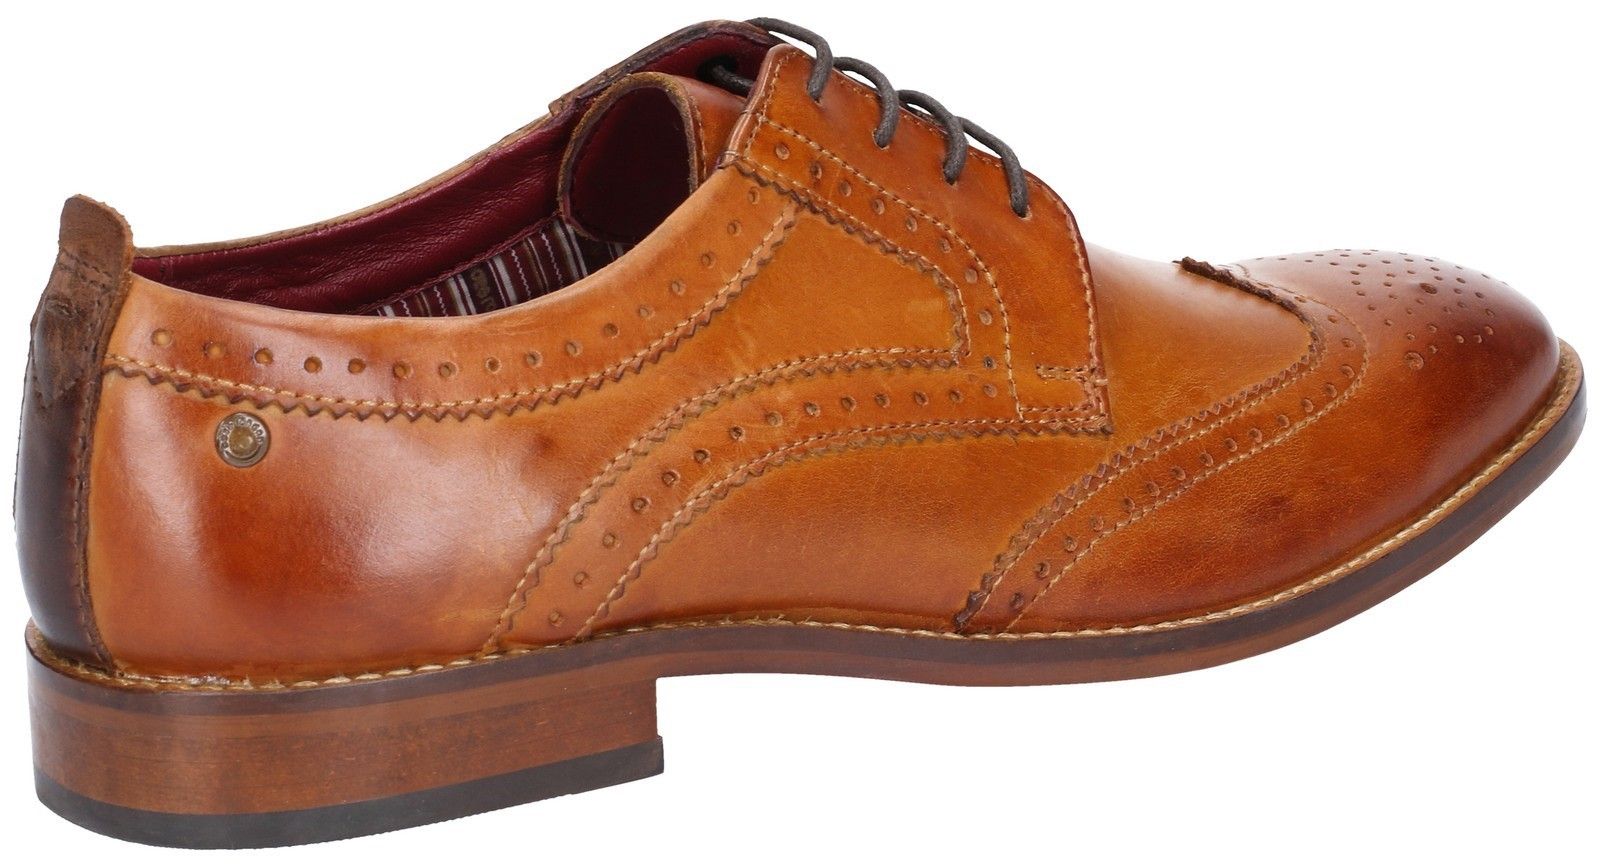 A fierce shoe, made with a durable slim line resin sole and offering a generous heel. From the Base London Spotlight collection, this sharp wing-tip brogue is made from the highest quality leathers and is perfect for all formal occasions. High quality leather upper. 
Slim line Resin sole. 
Brogue detailing.